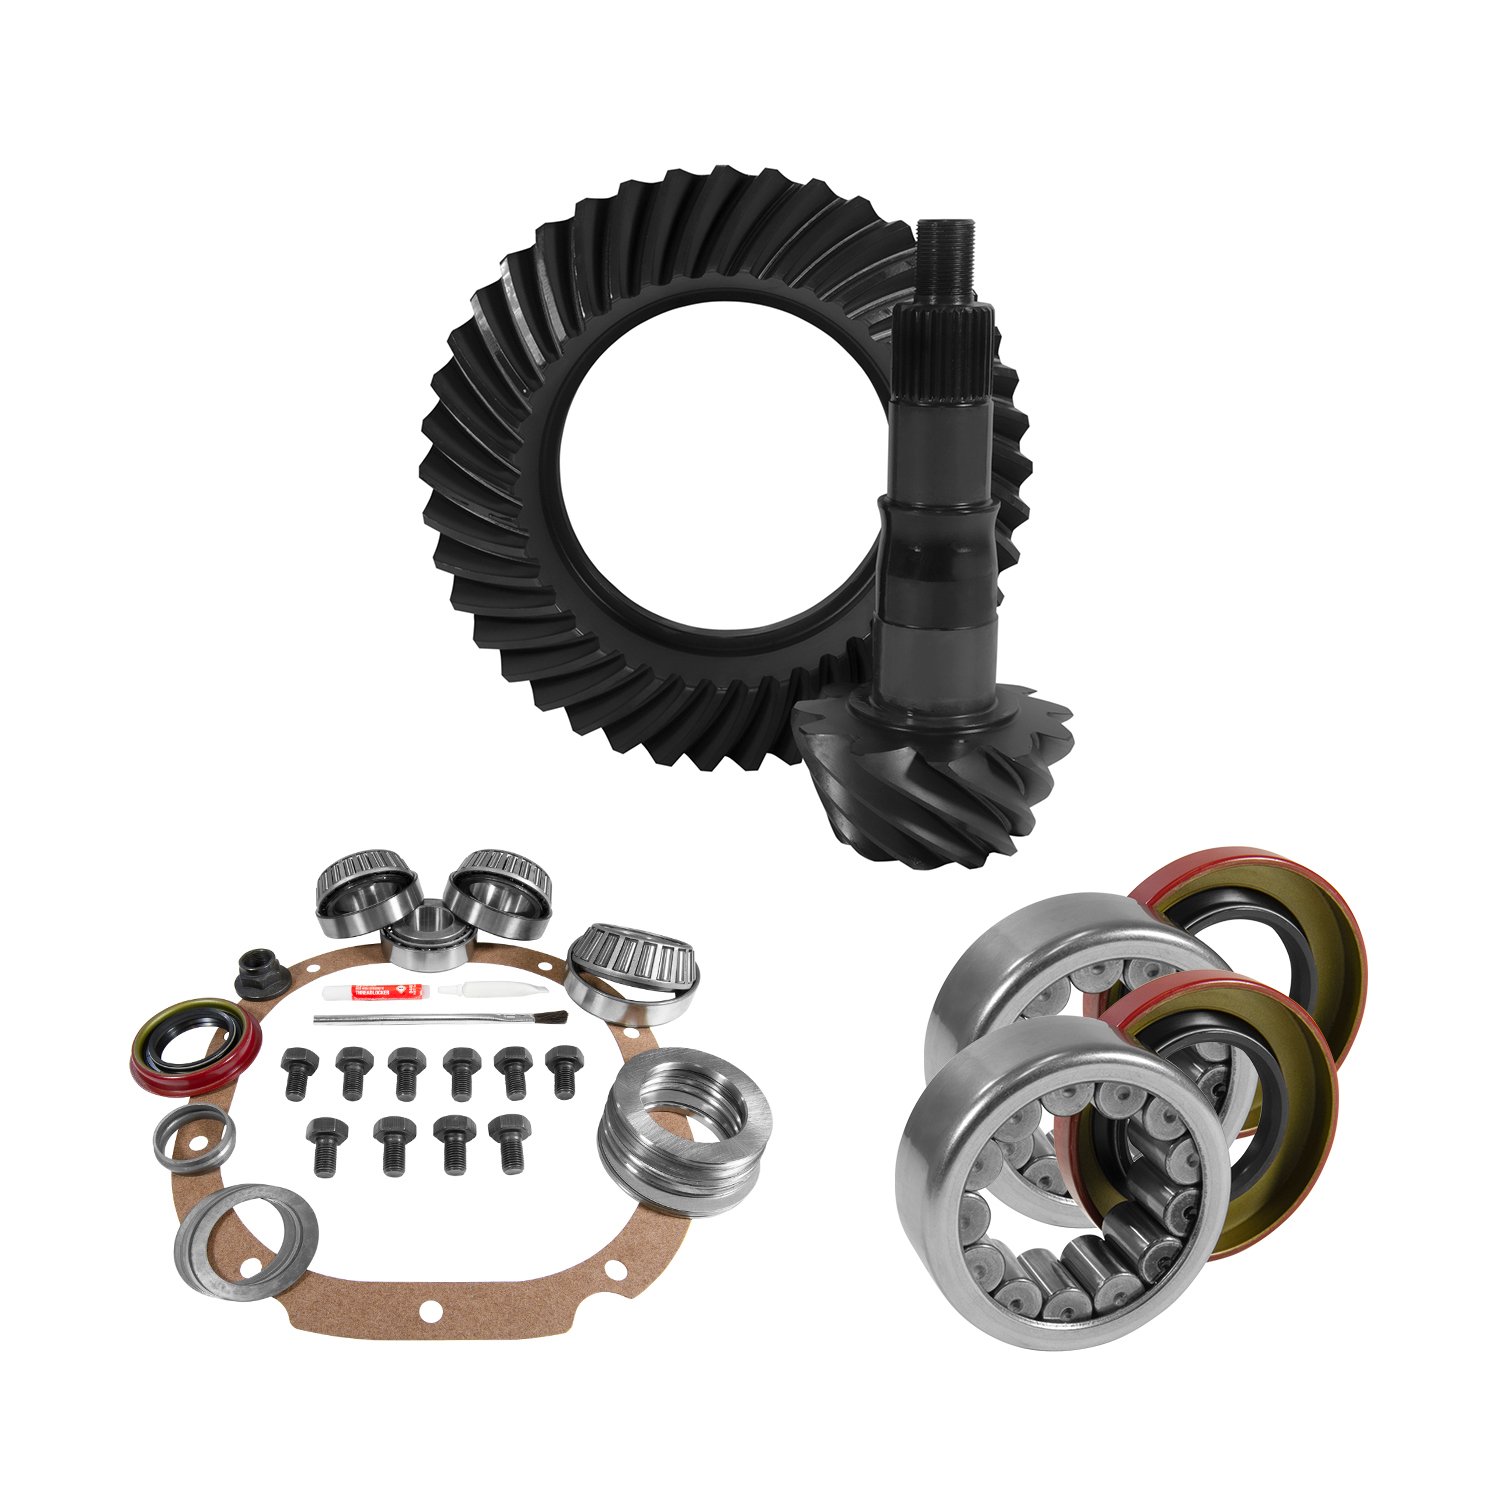 USA Standard 10768 8.8 in. Ford 4.11 Rear Ring & Pinion Install Kit, 2.99 in. Od Axle Bearings & Seals